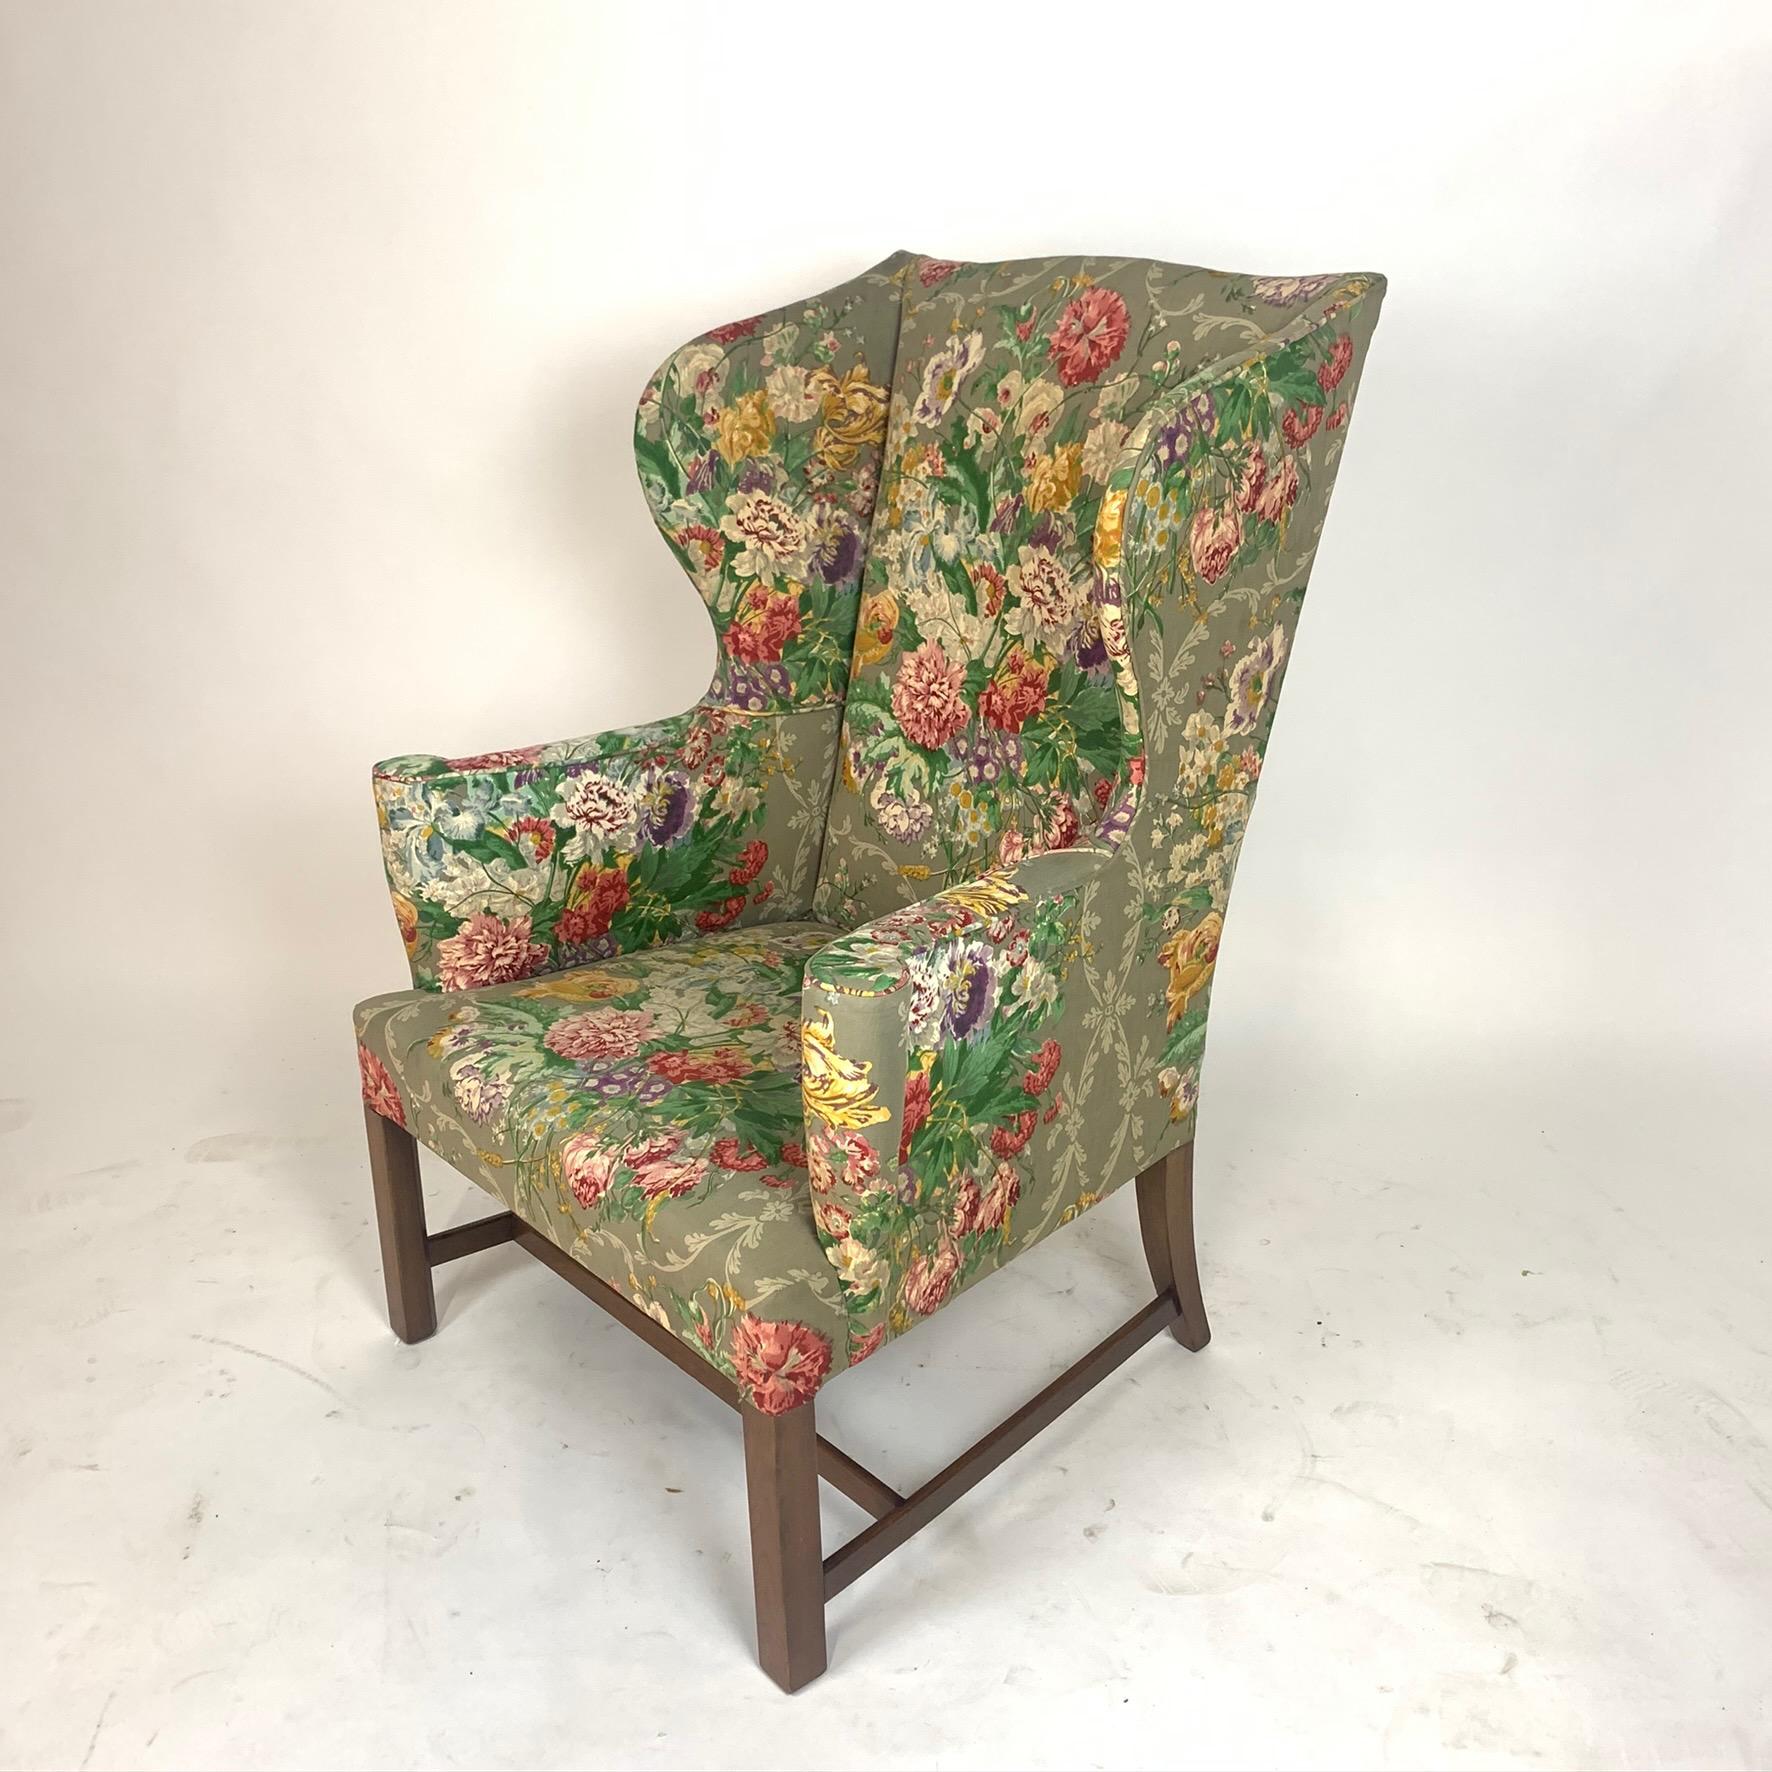 Exceptional Early American Wingback Chairs with Stunning Floral Upholstery 7